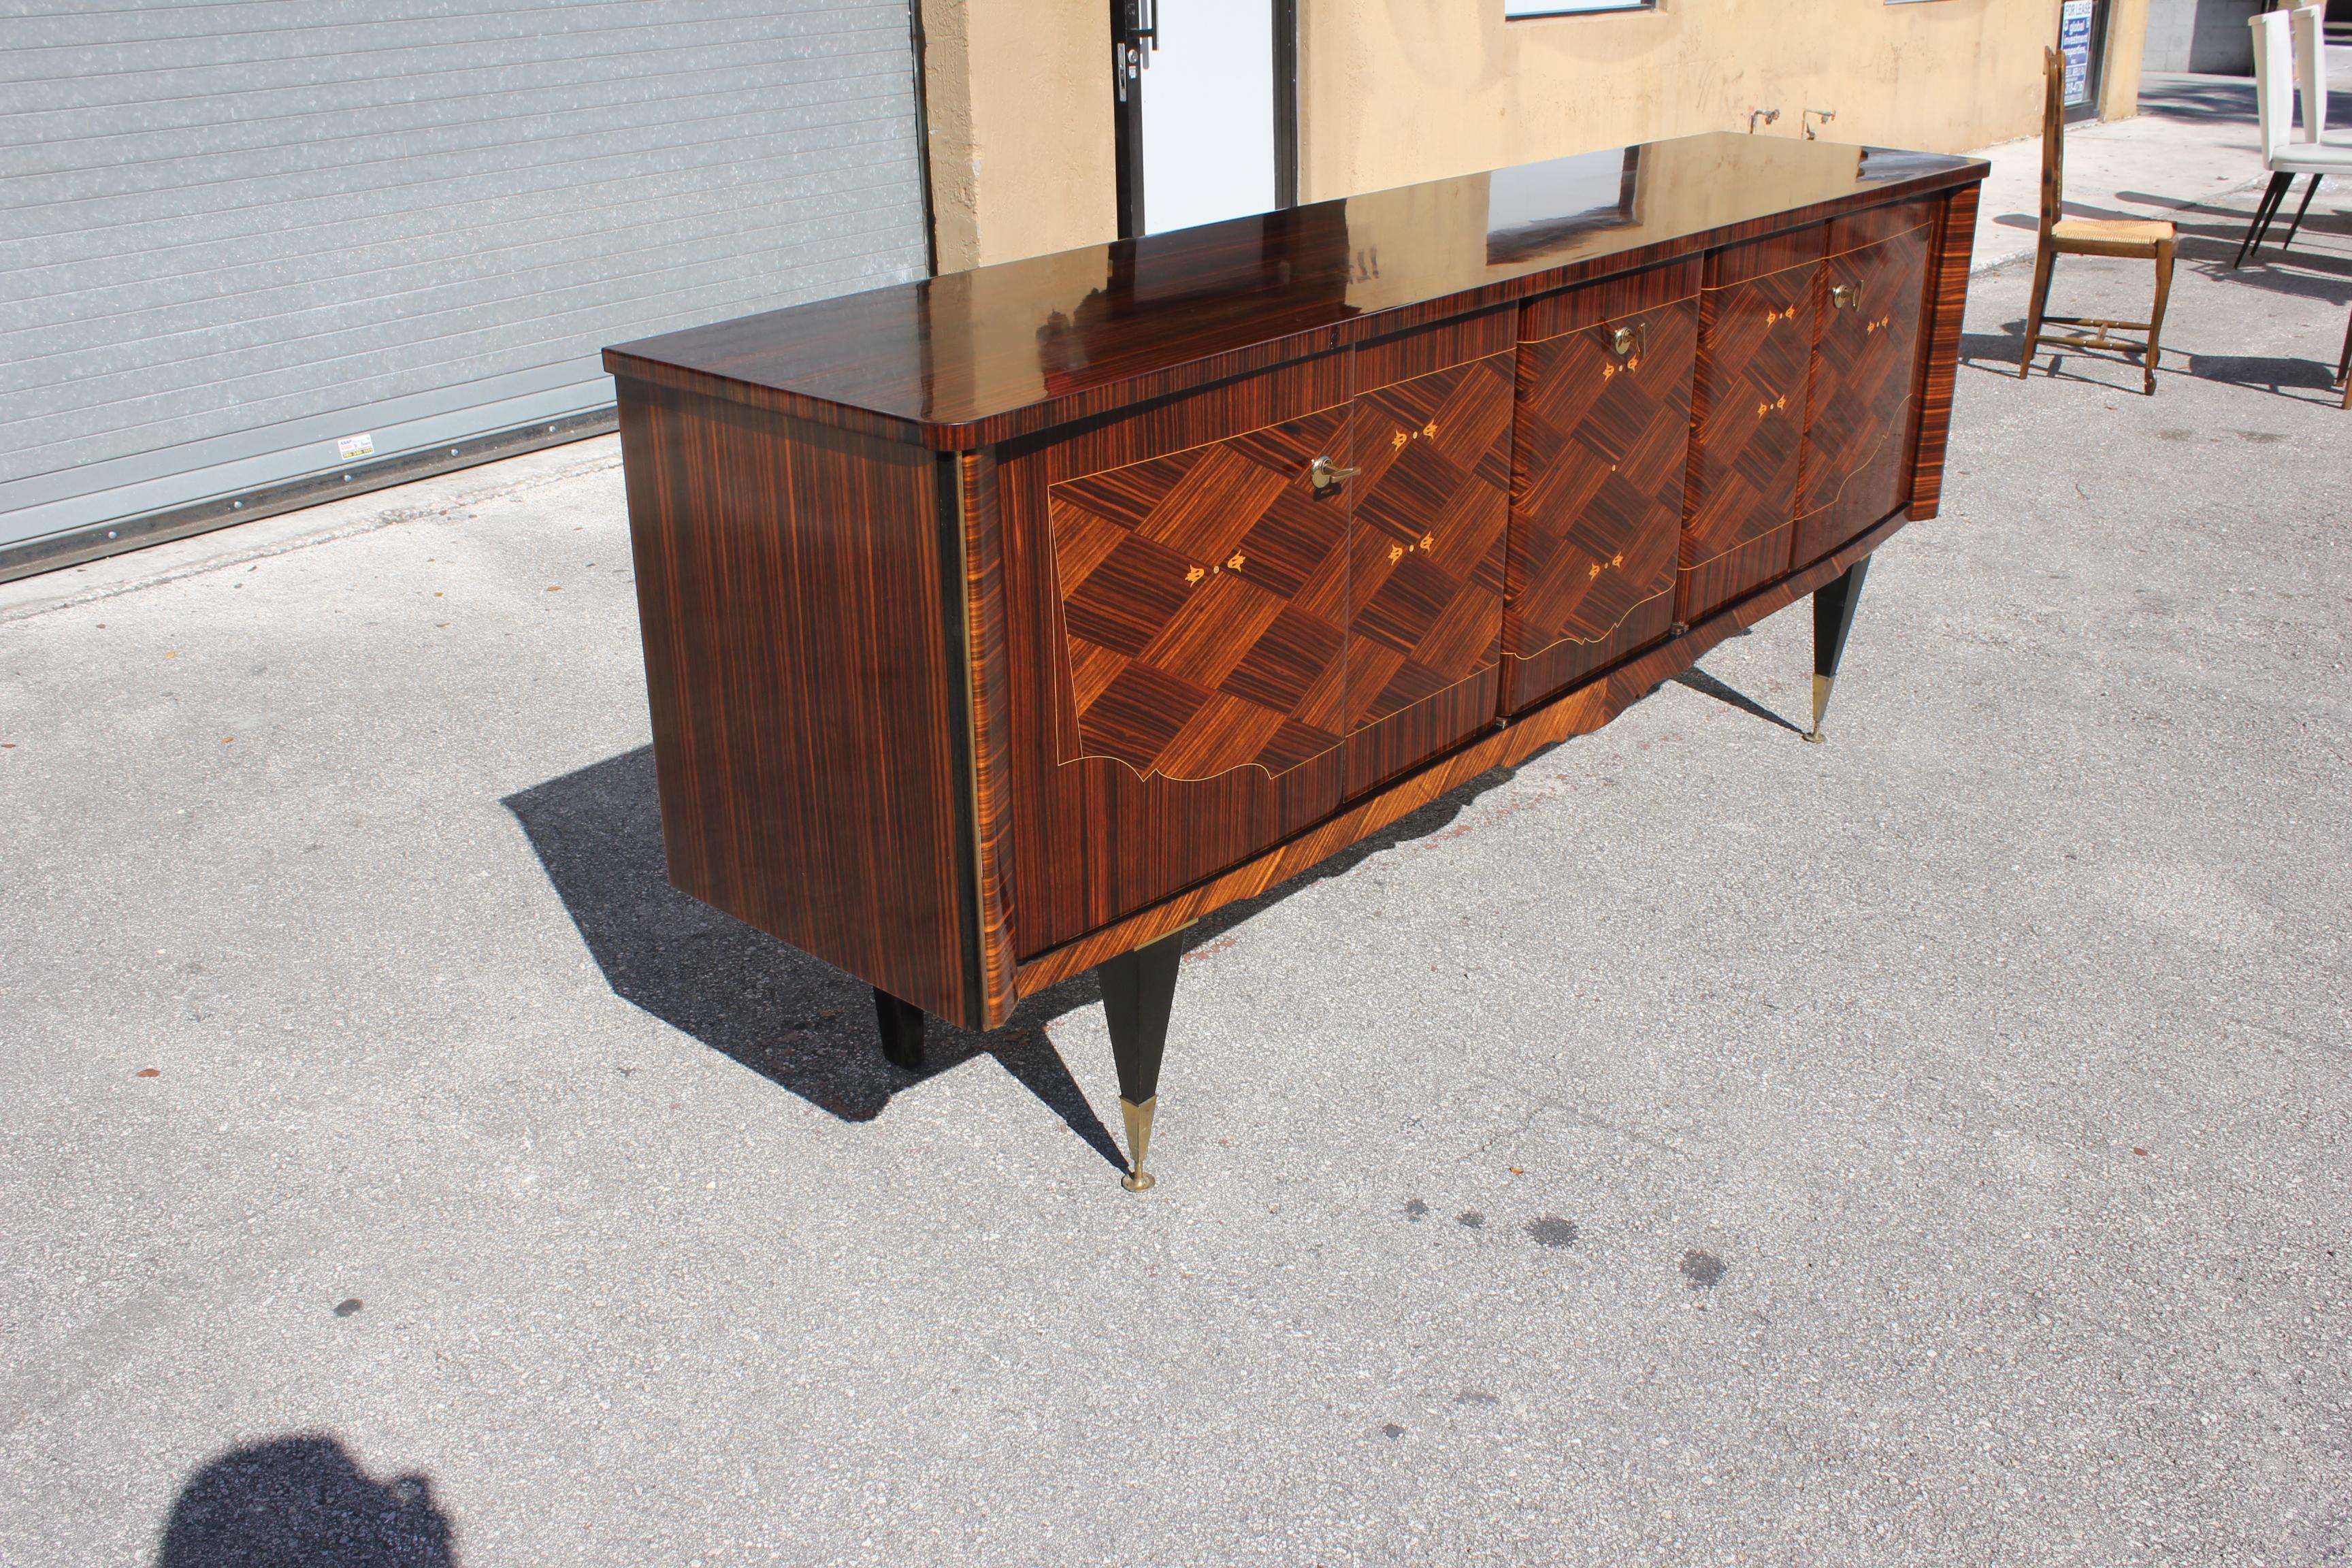 Long French modern Macassar ebony sideboard / buffet / bar / credenzasa long French 5 doors exotic Macassar ebony mother of pearl sideboard / buffet / bar, circa 1940s. The sideboard are in very good condition, with 2 drawers inside, and with 4